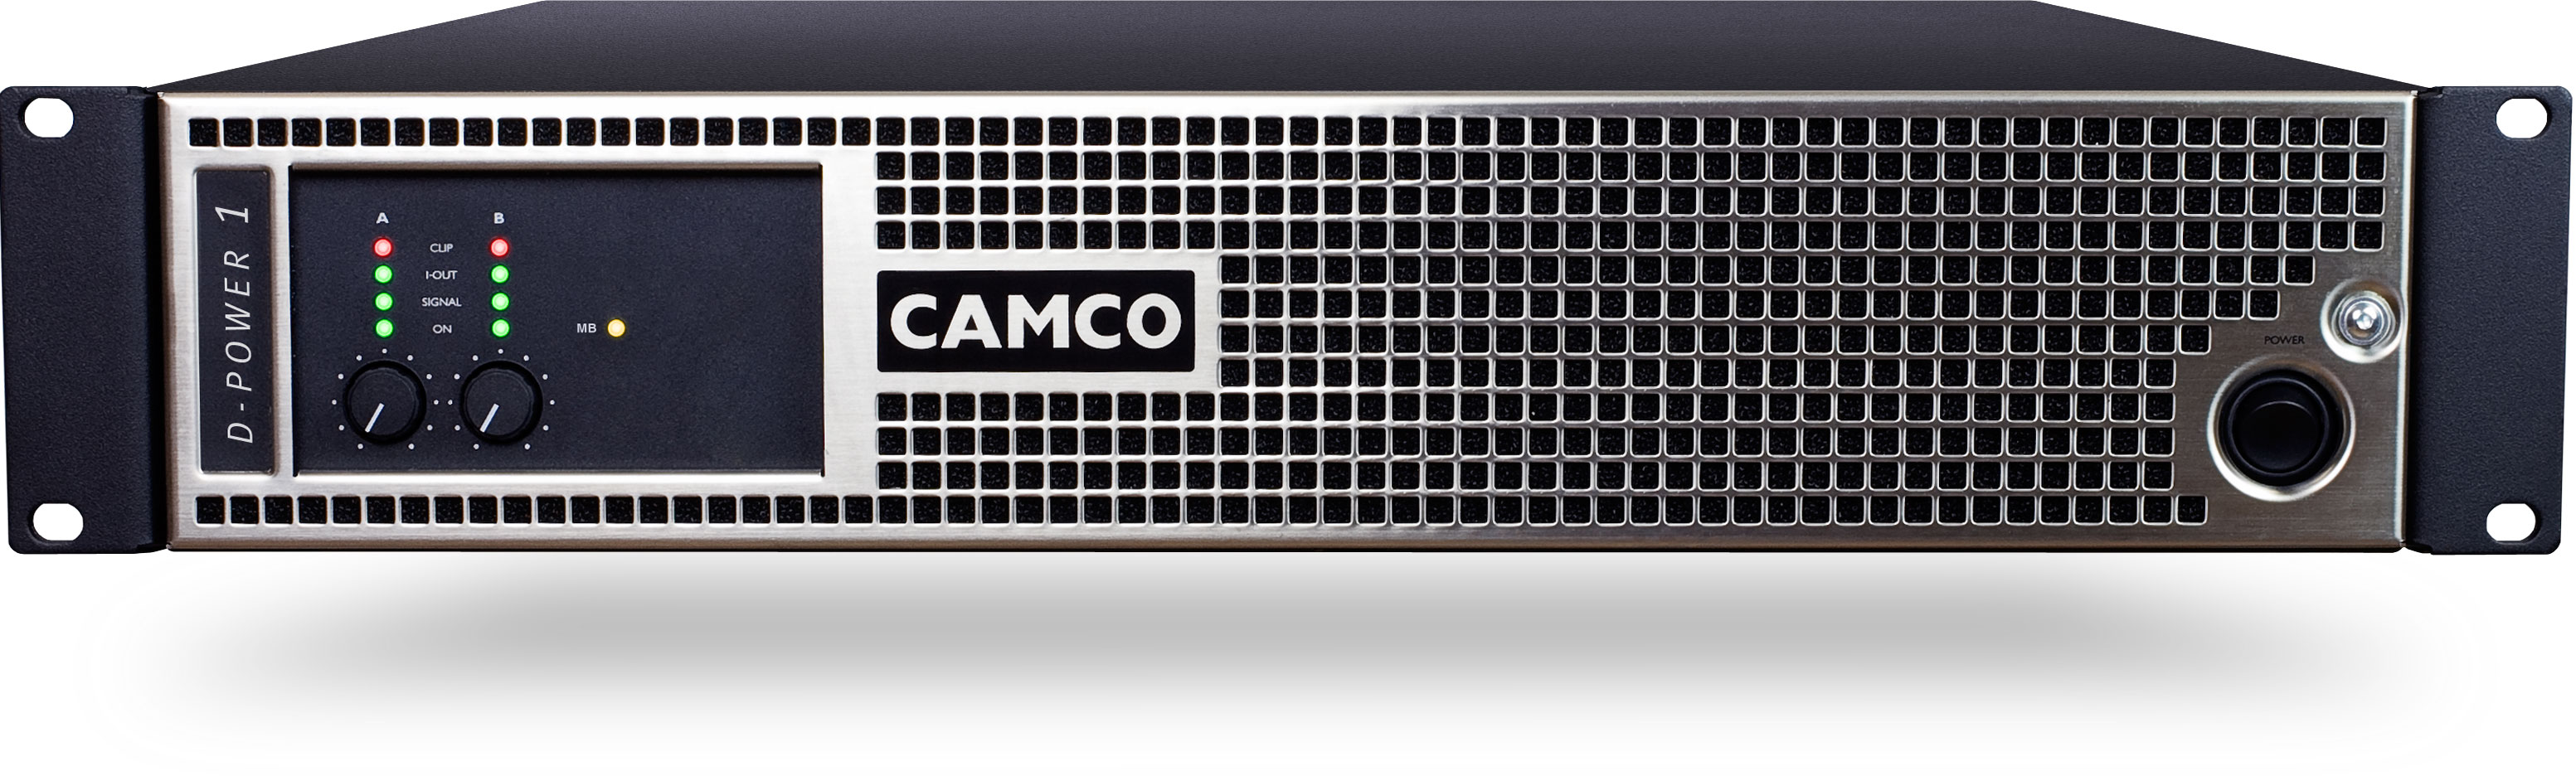 CAMCO D-Power 4